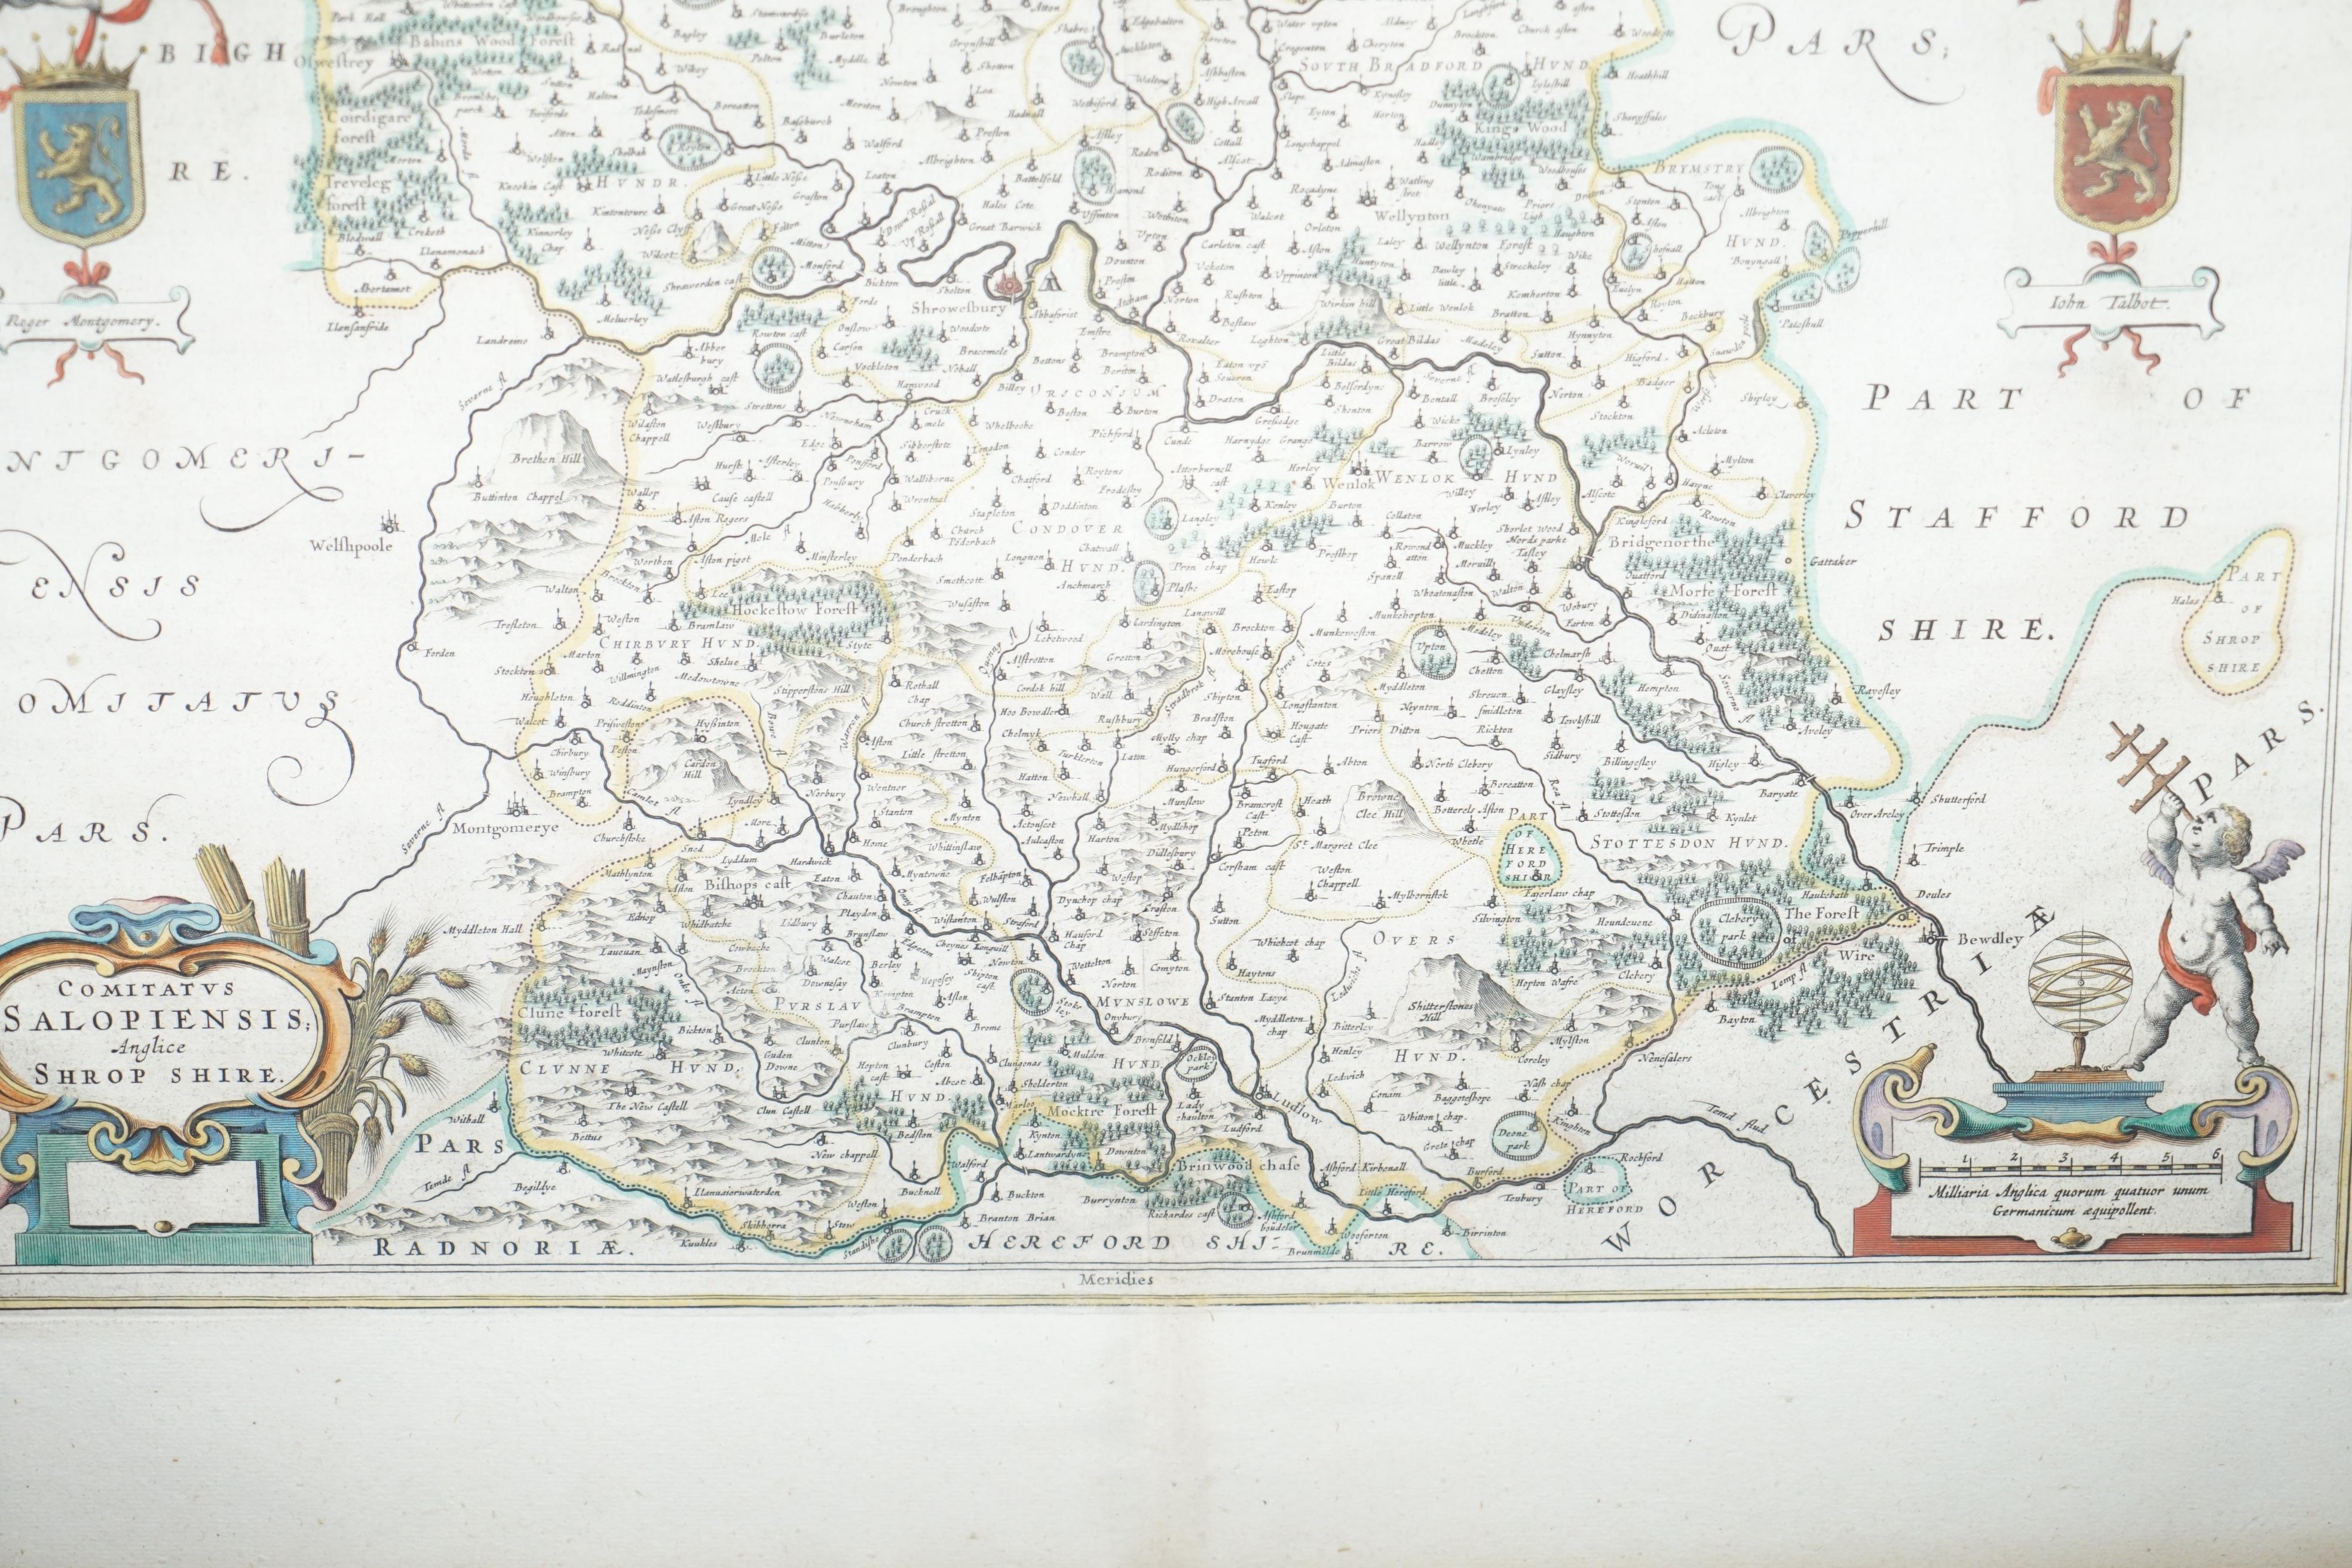 English Staffordshire 1645 Hand Colored Antique Print Staffordiensis Comitatvs Map For Sale